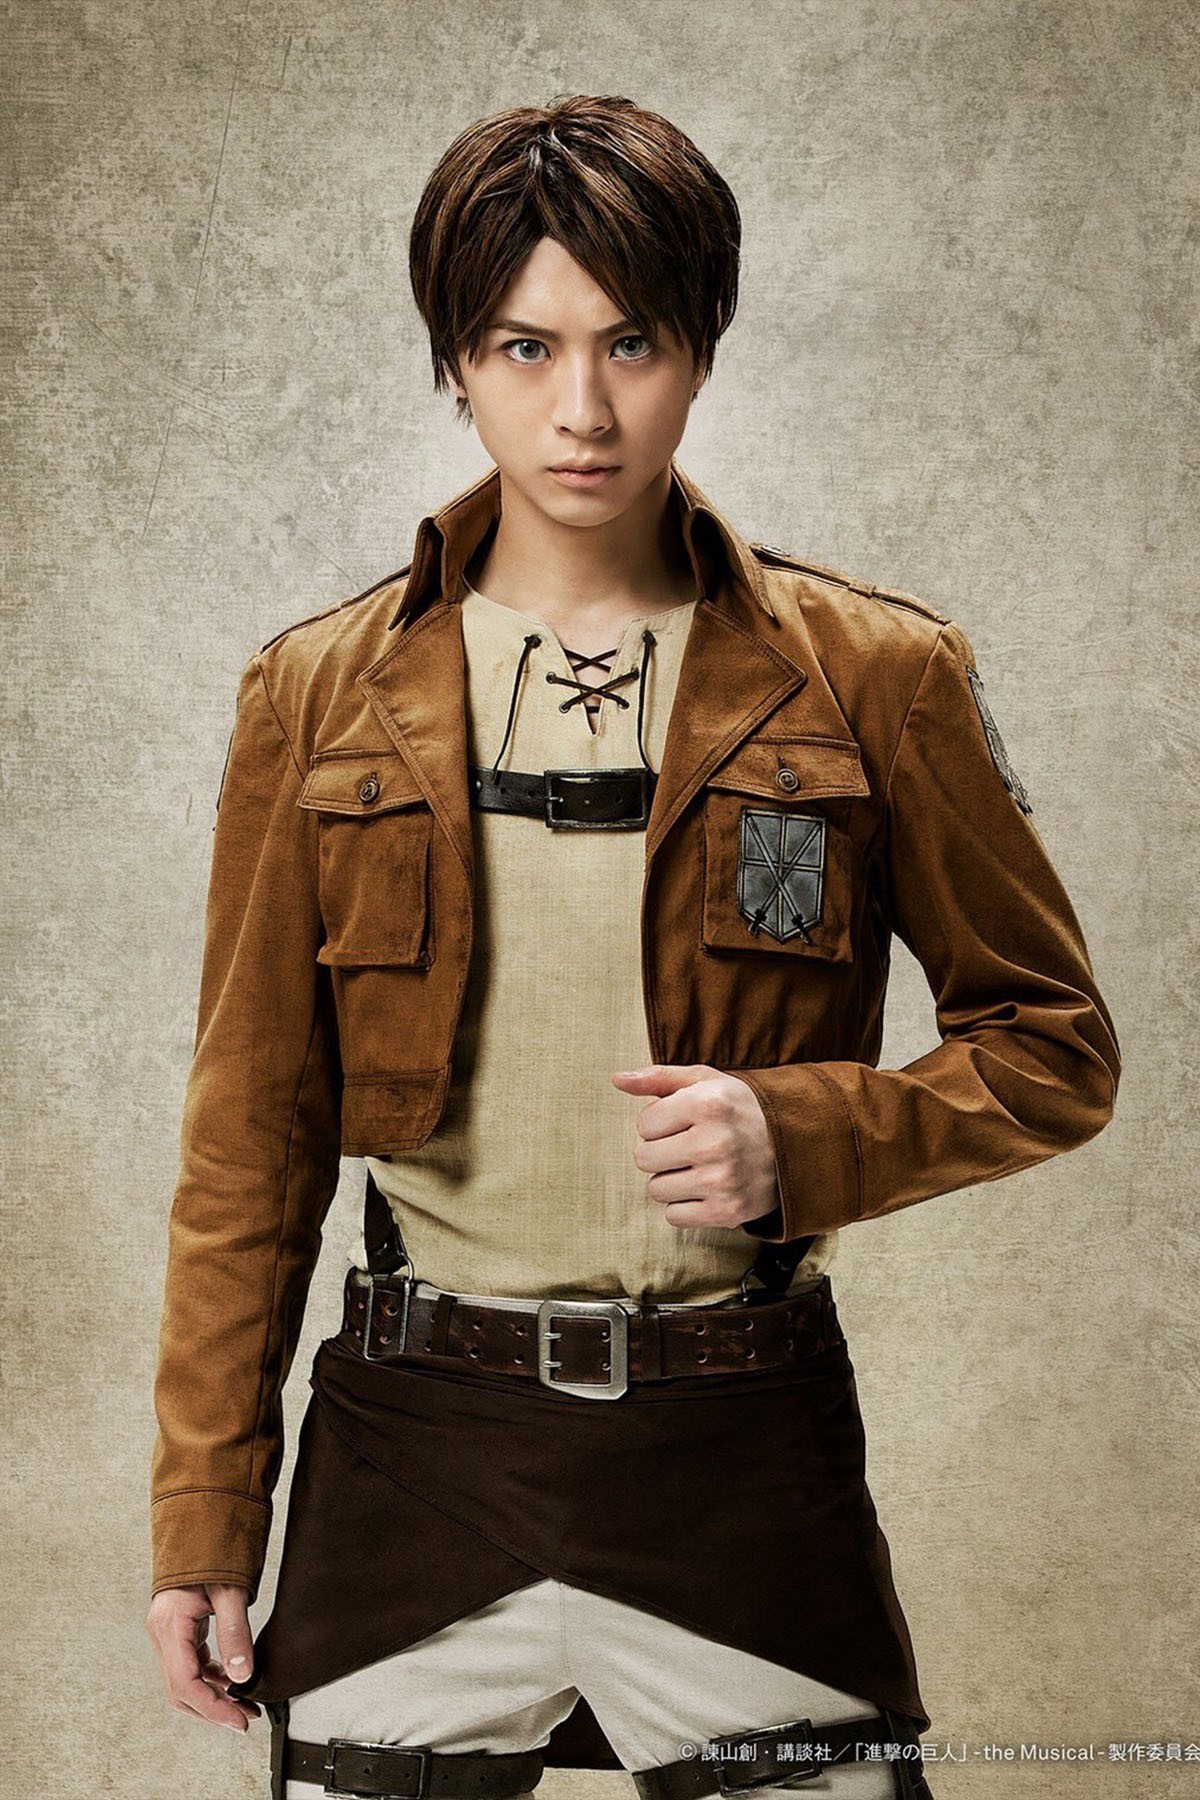 25+ Actors Who Could Play Eren Jaeger in a Live Action Film